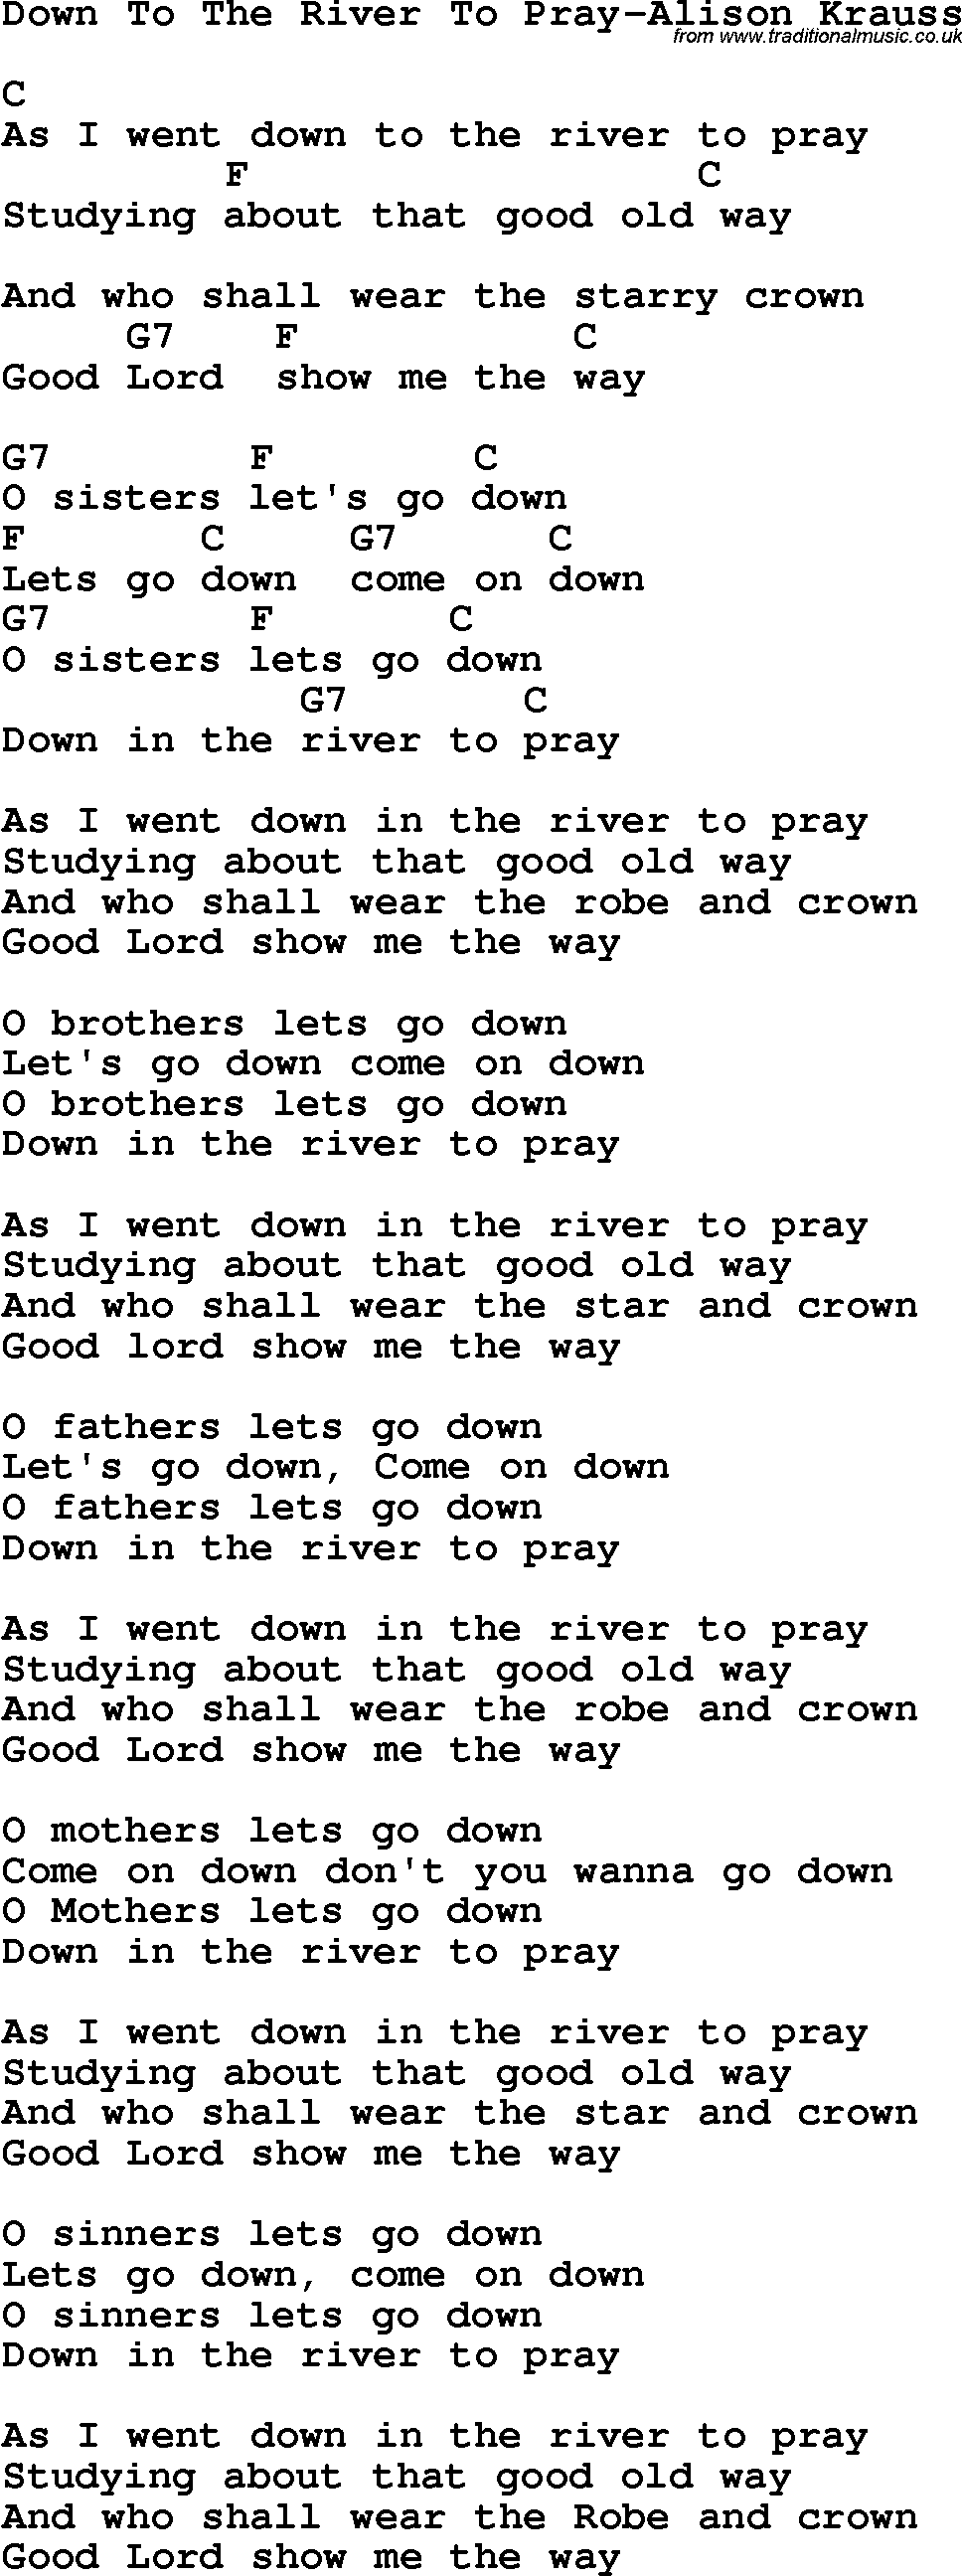 Country, Southern and Bluegrass Gospel Song Down To The River To Pray-Alison Krauss lyrics and chords